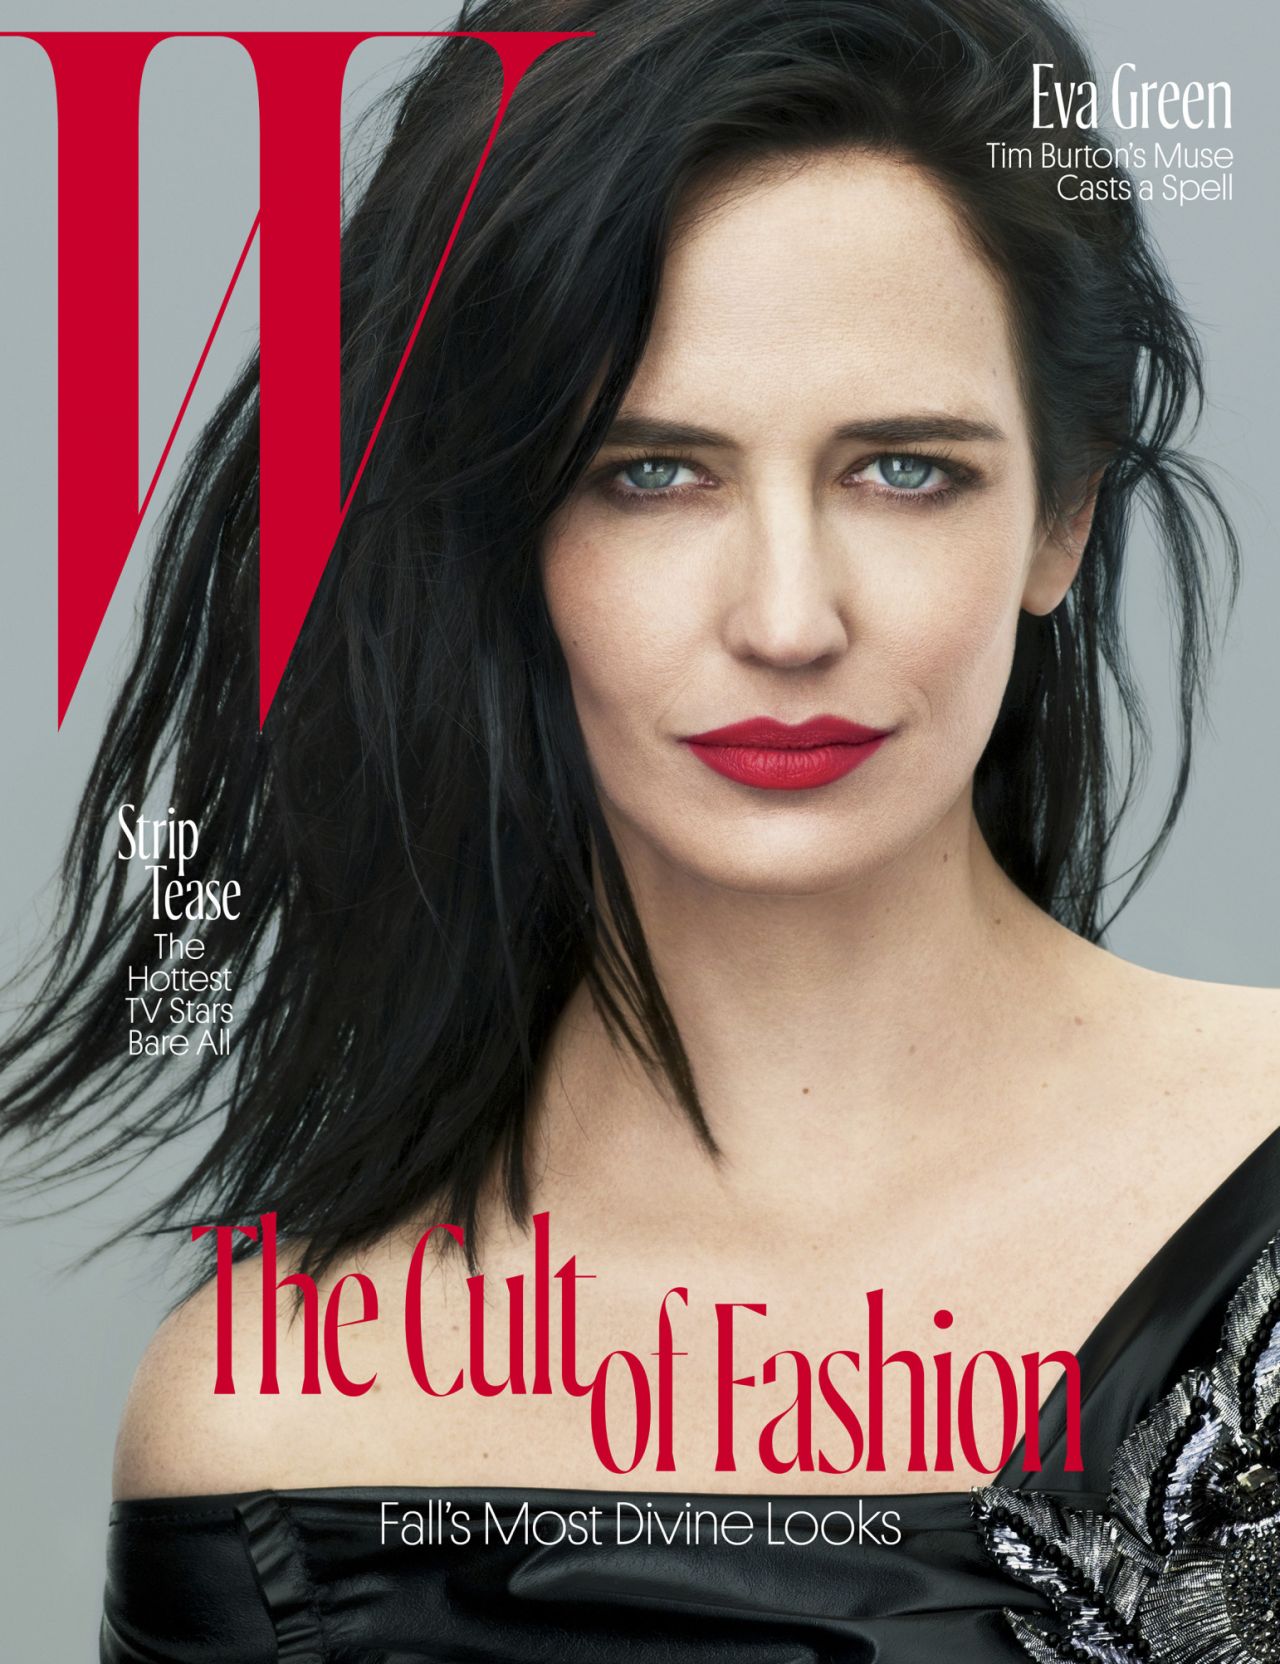 eva-green-w-magazine-august-2016-cover-and-photos-2